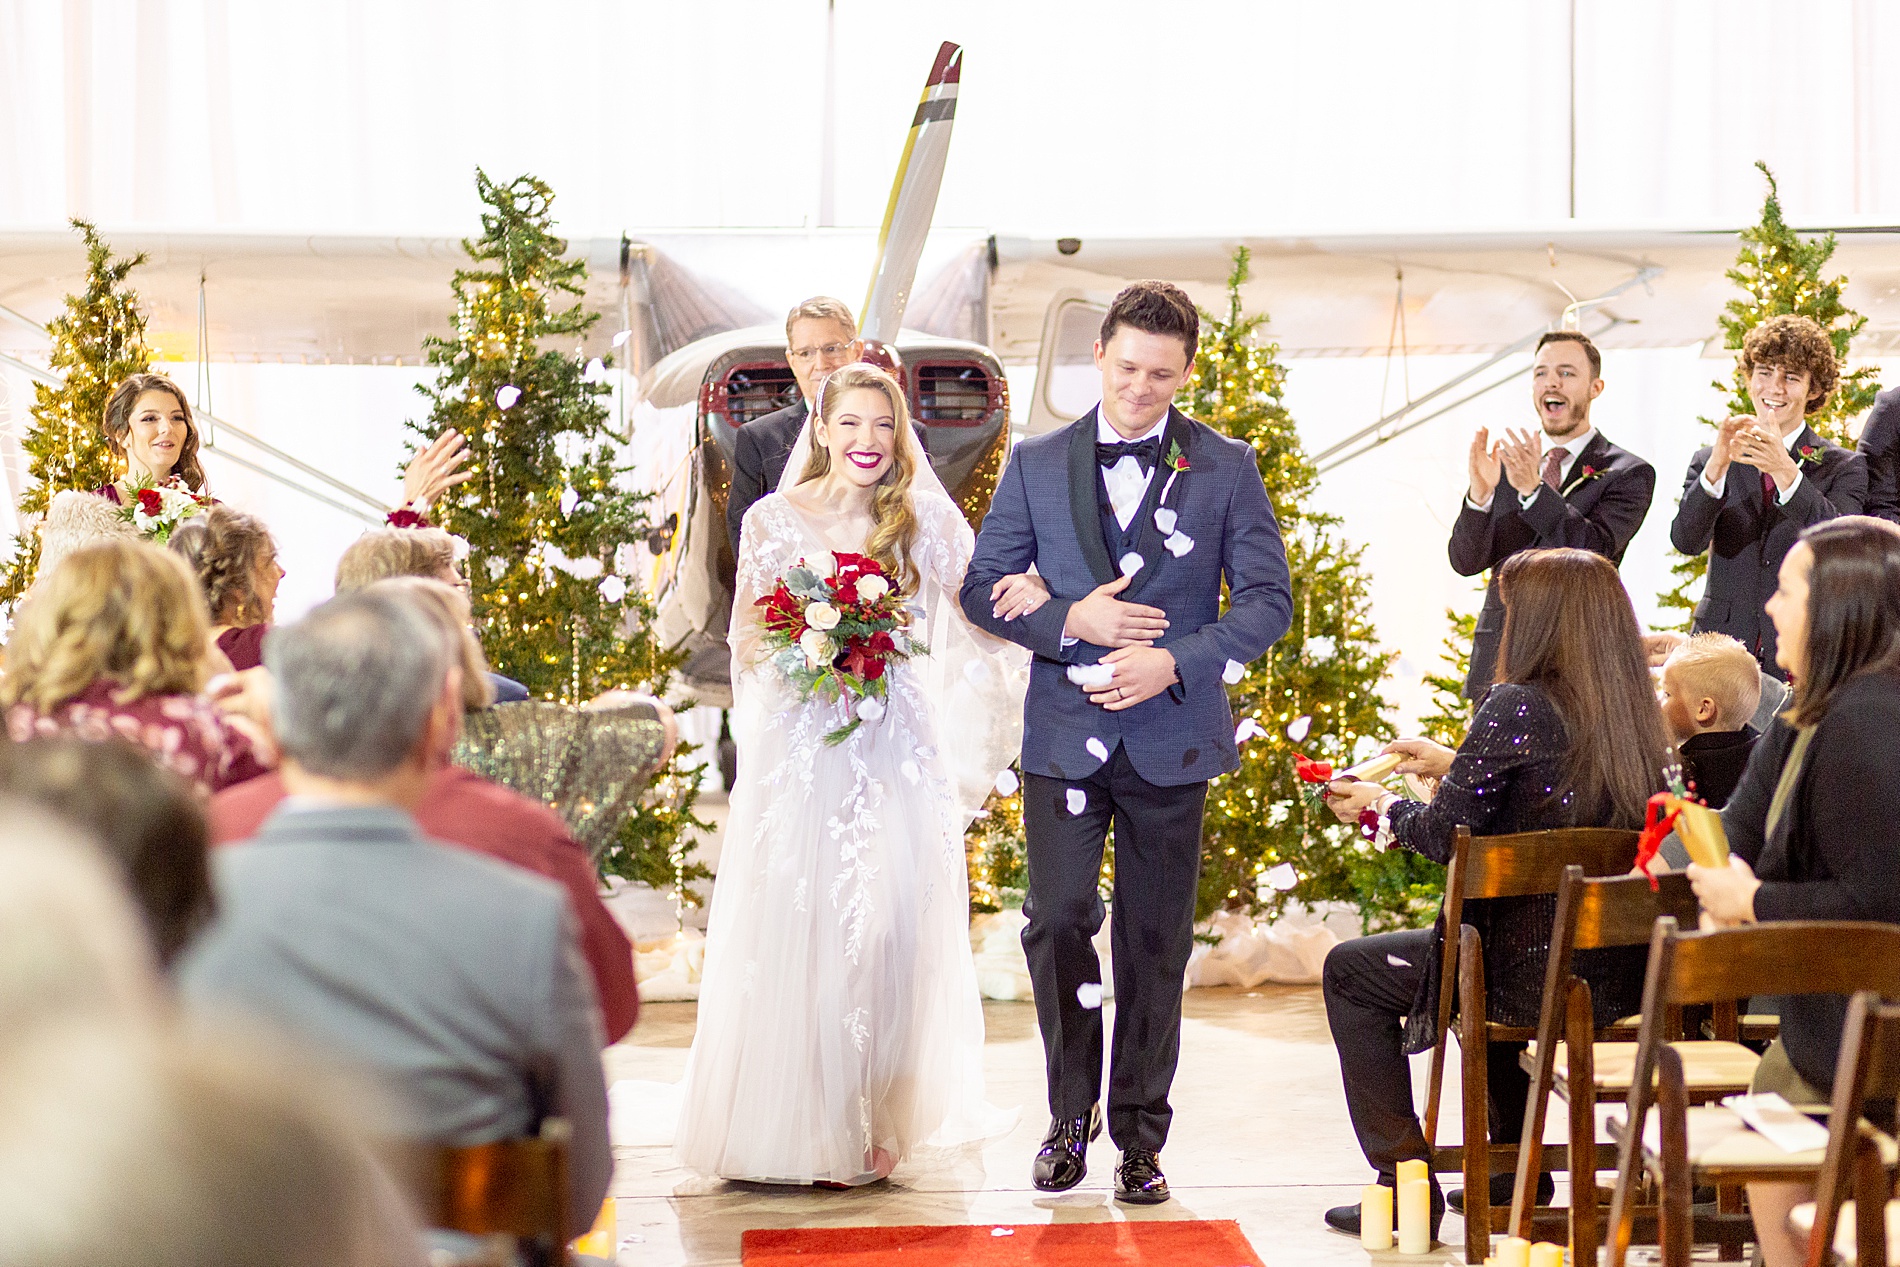 guests throw rose petals as newlyweds exit ceremony